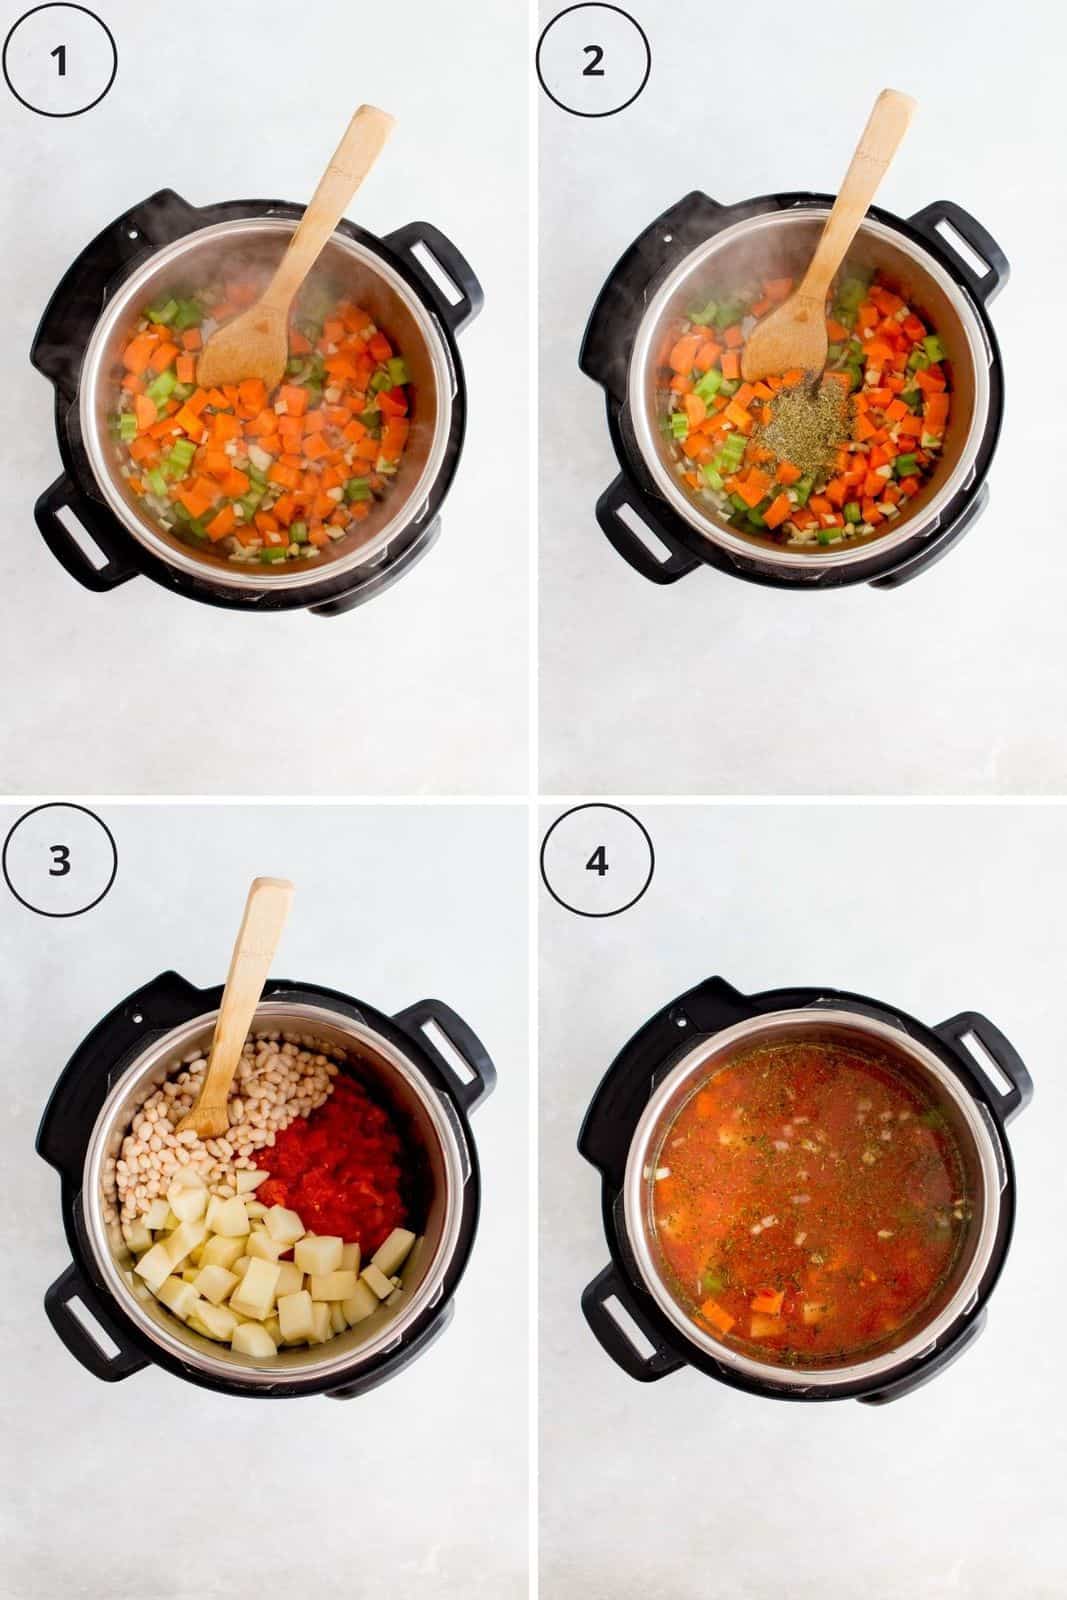 Set of 4 photos showing the ingredients sauted, seasoned, and mixed together.